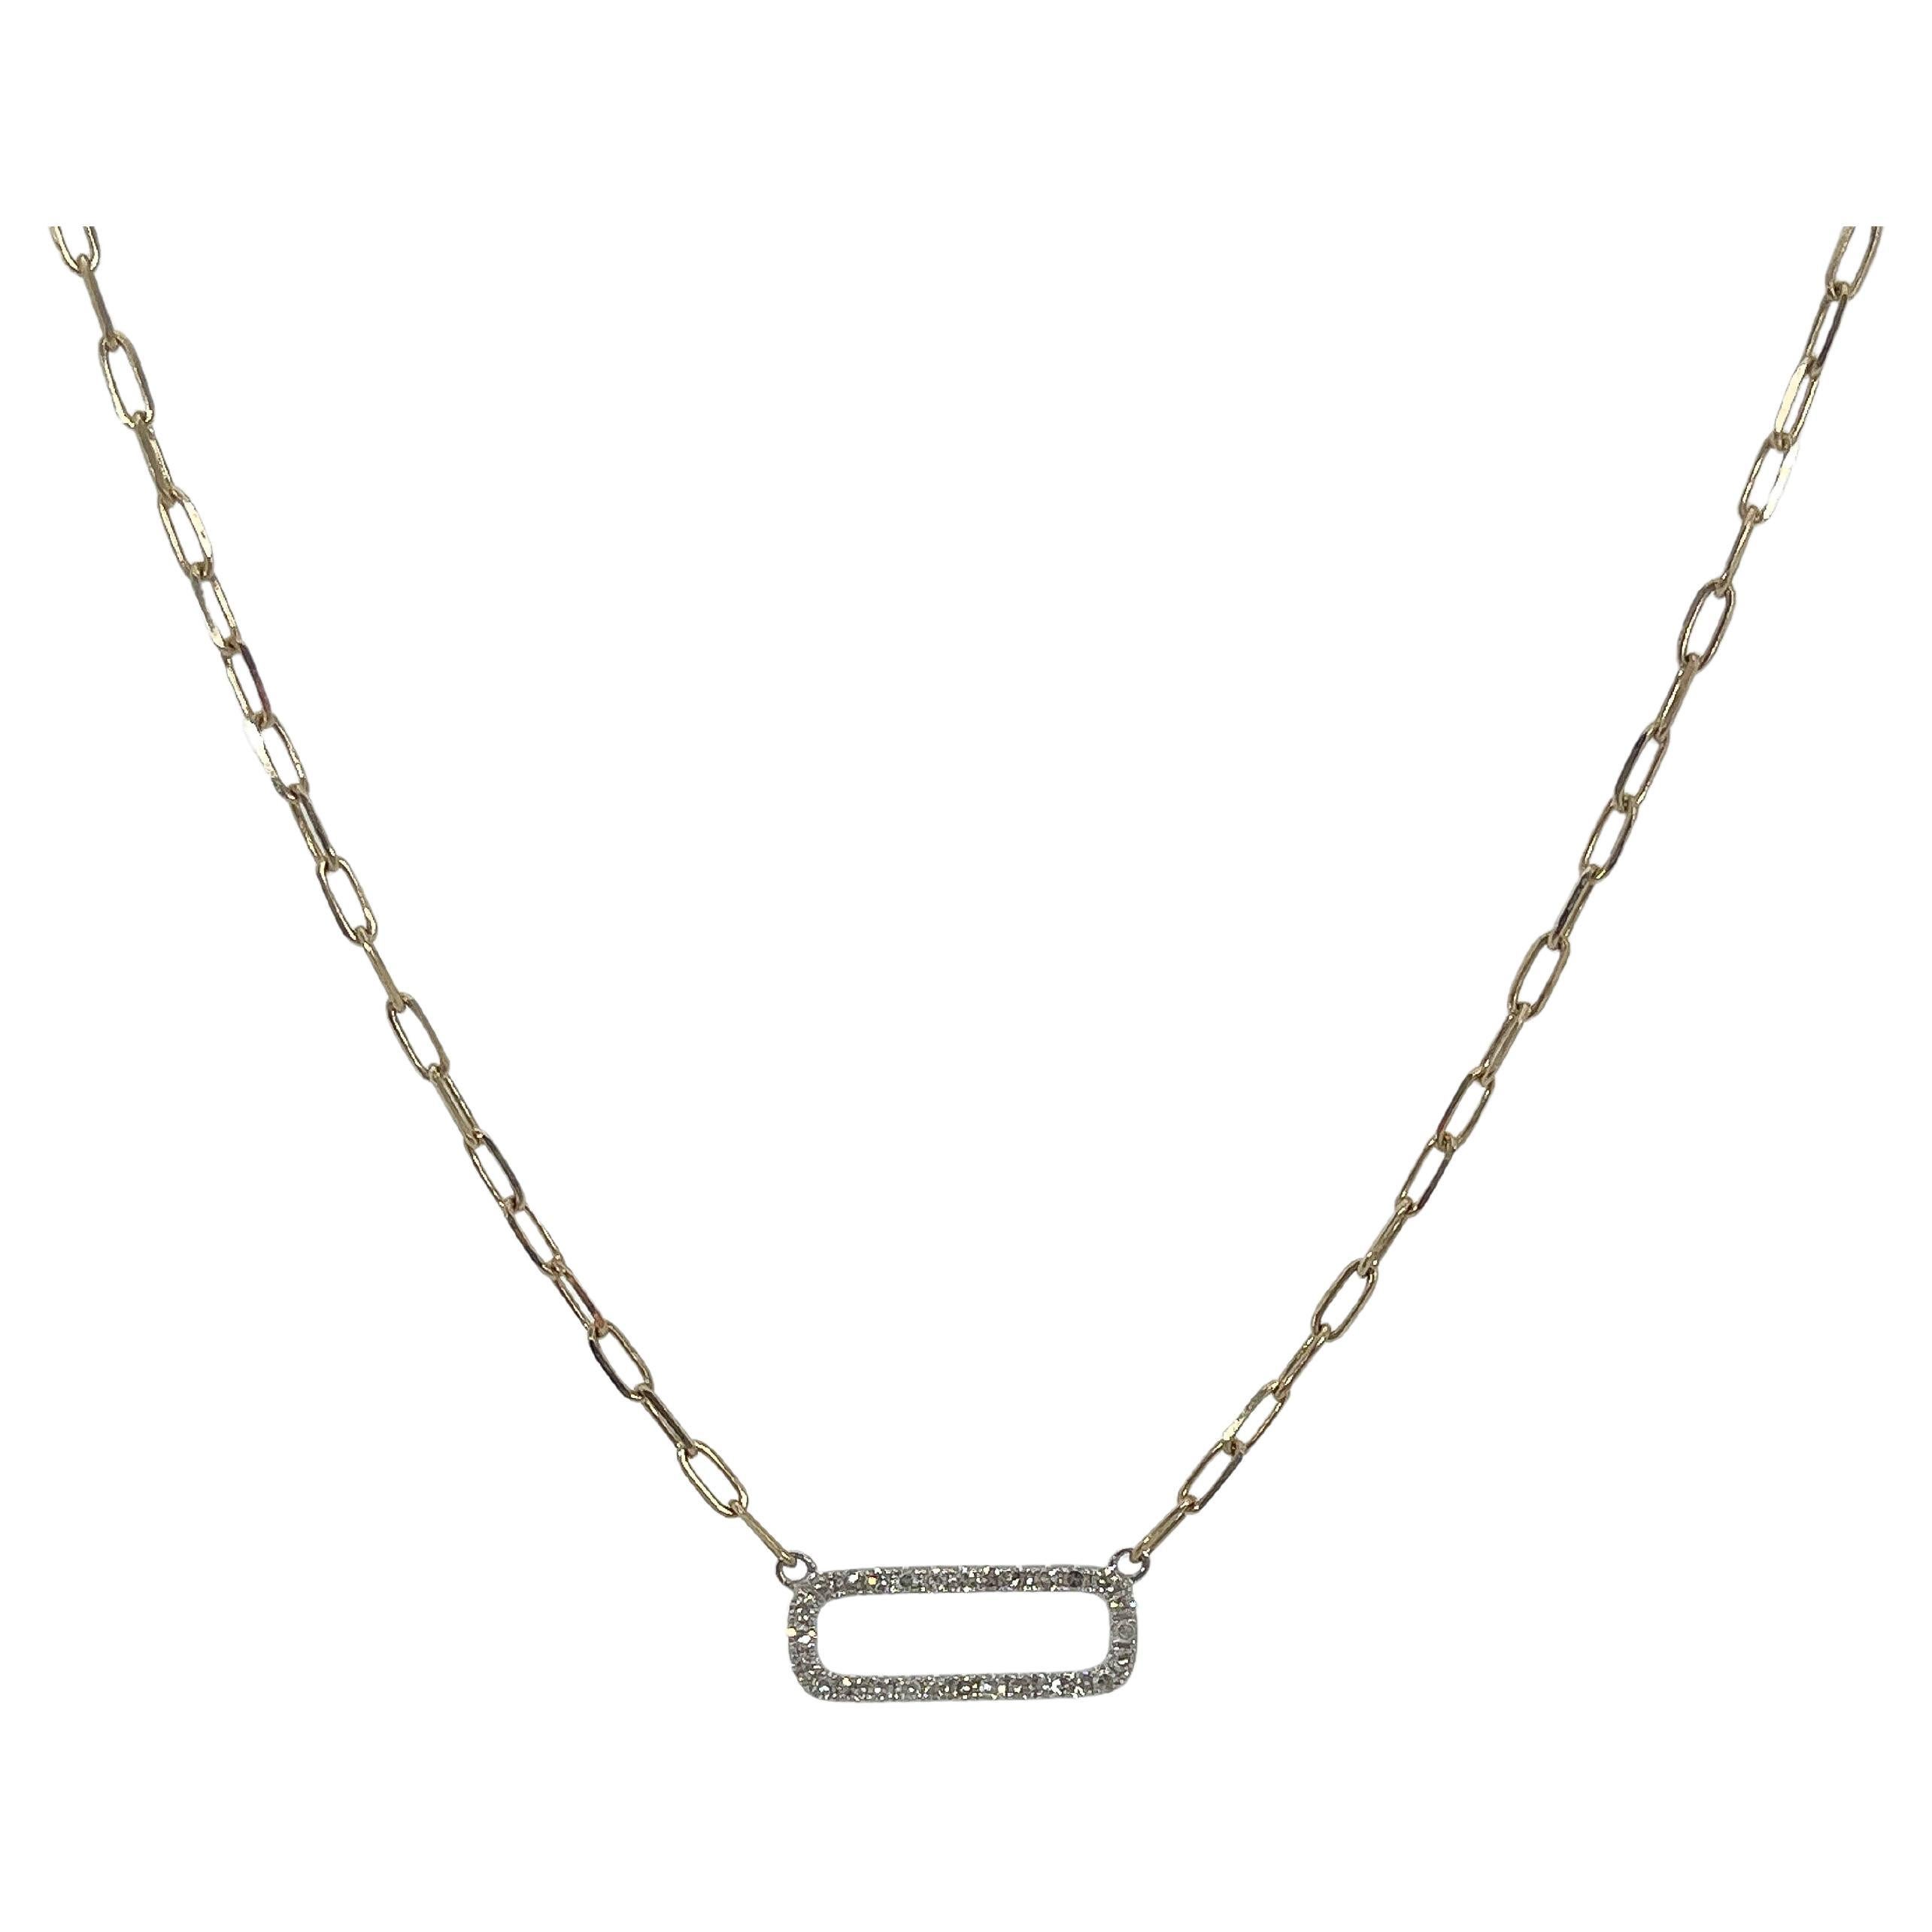 14K Two Toned .21 CTW Diamond Open Square Necklace 